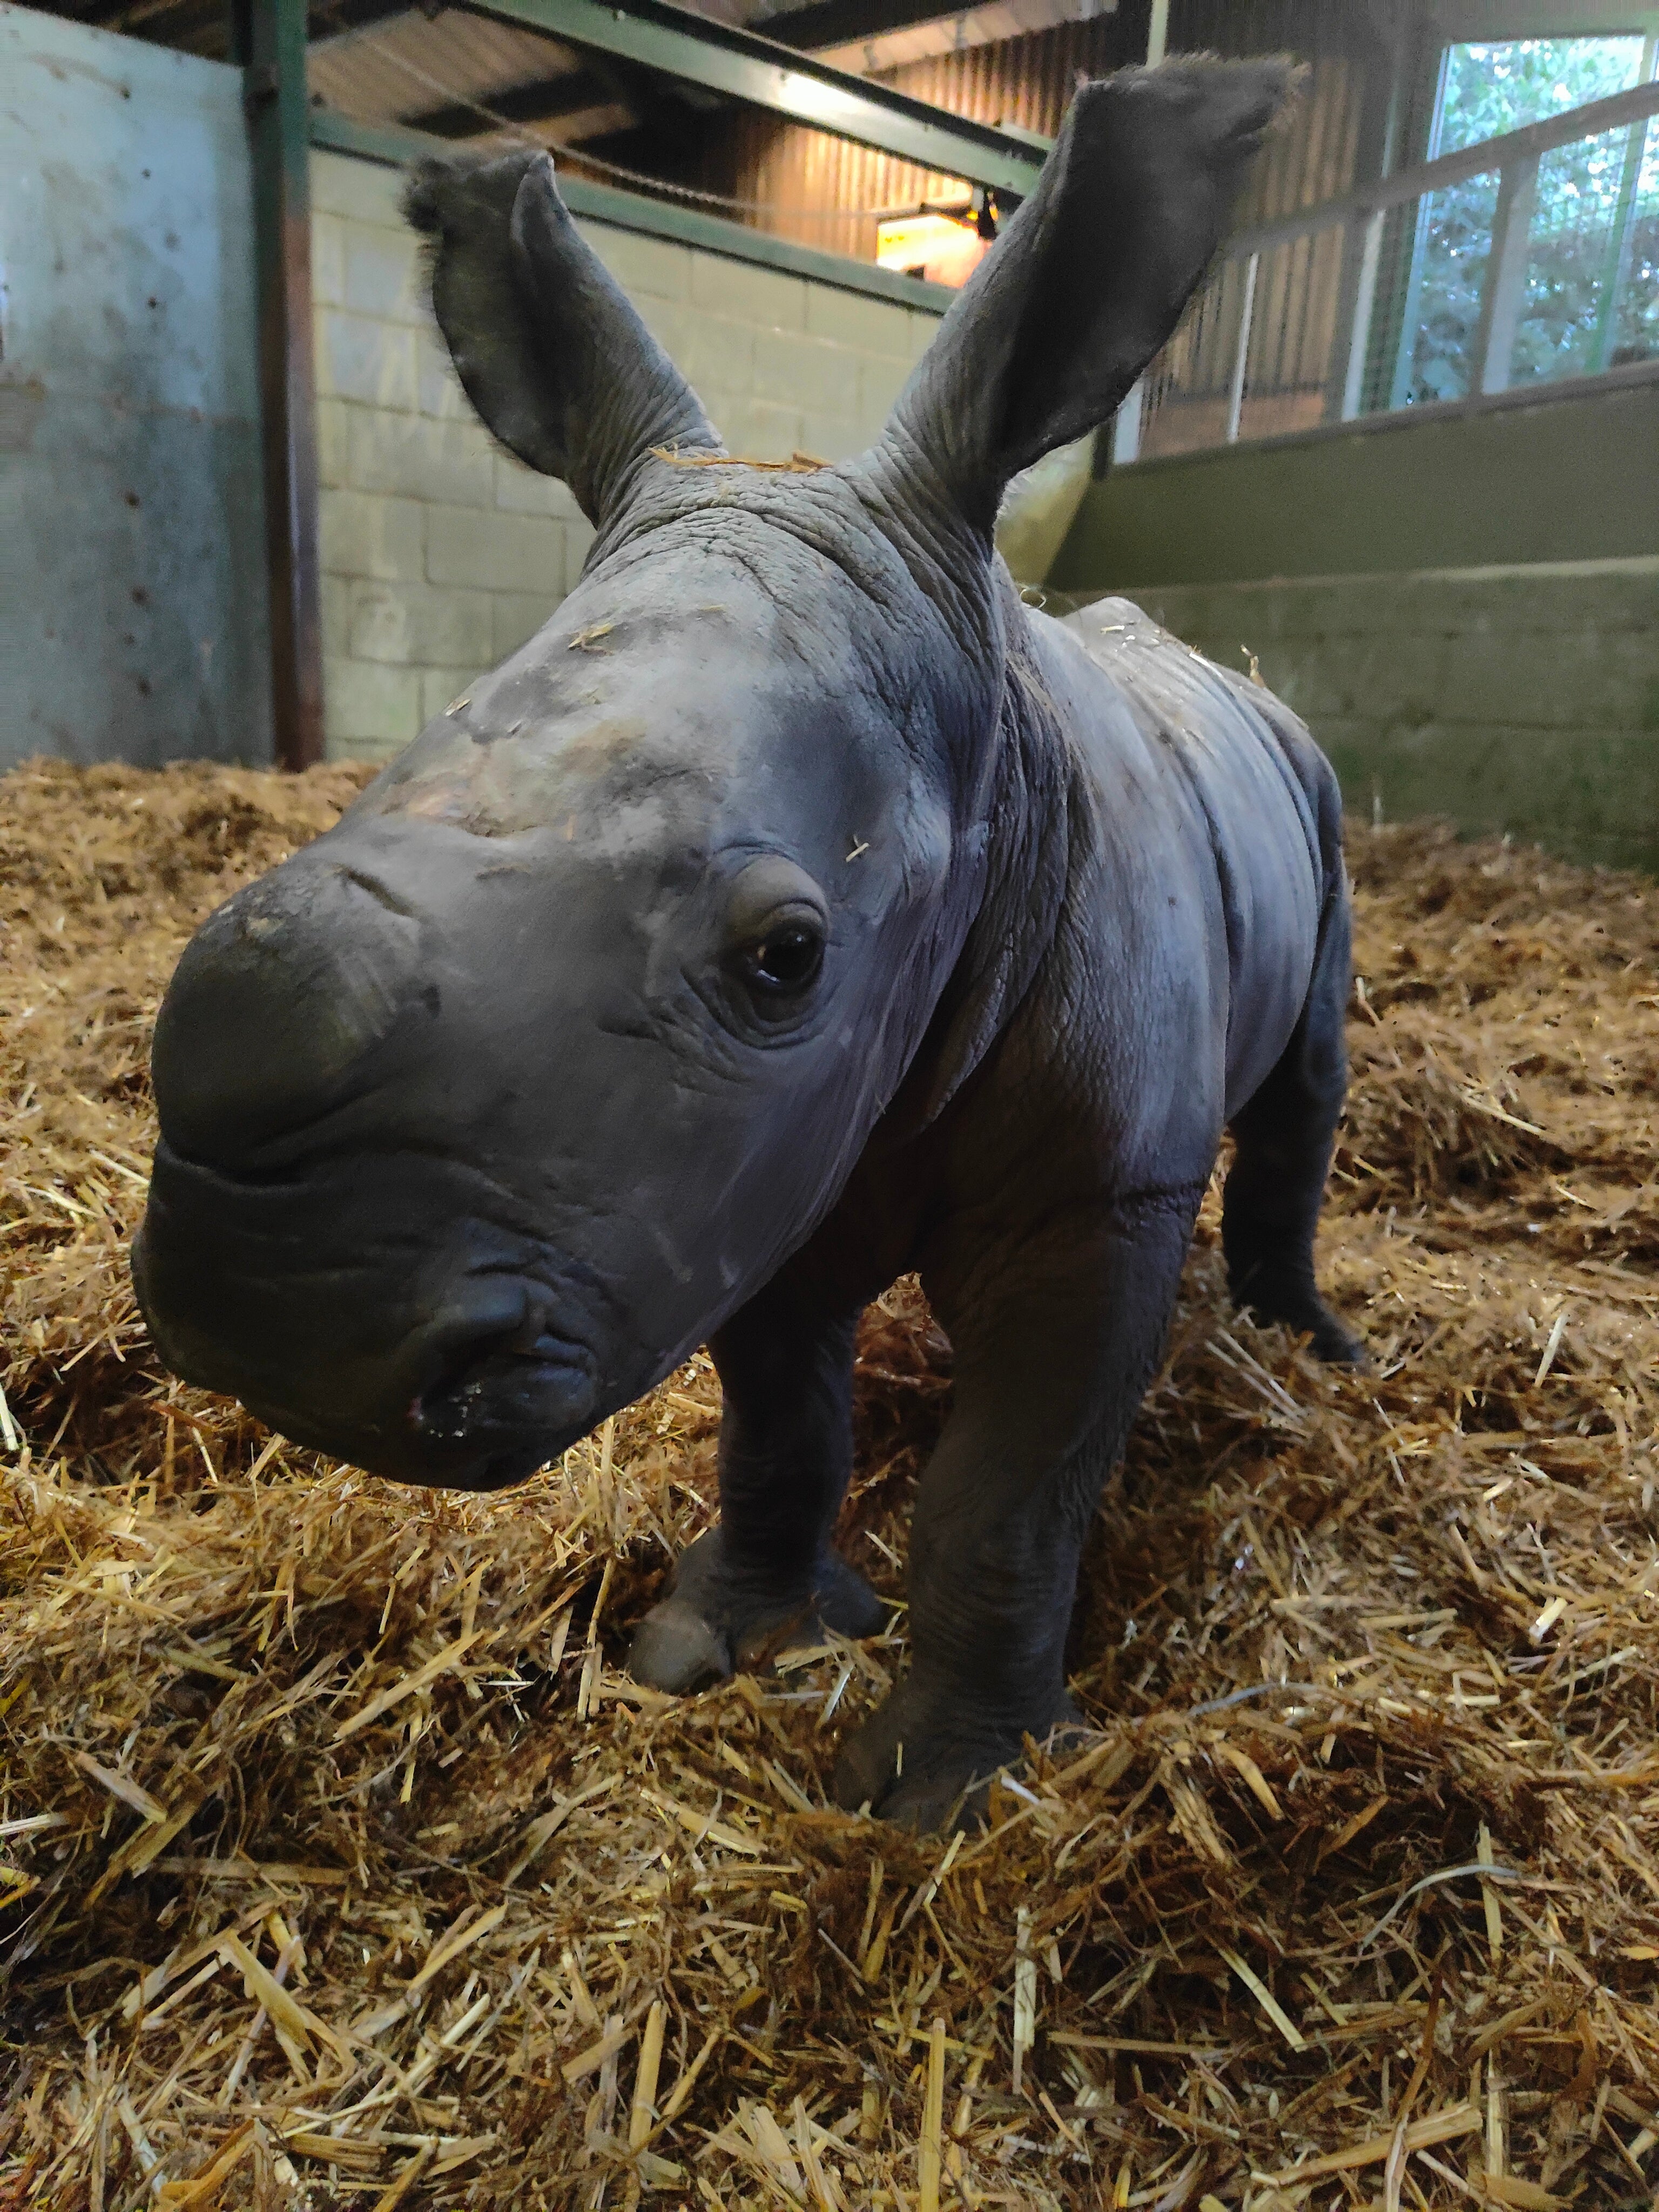 A rare baby white rhino has been born at Africa Alive near Lowestoft, Suffolk (Zoological Society of East Anglia/PA)